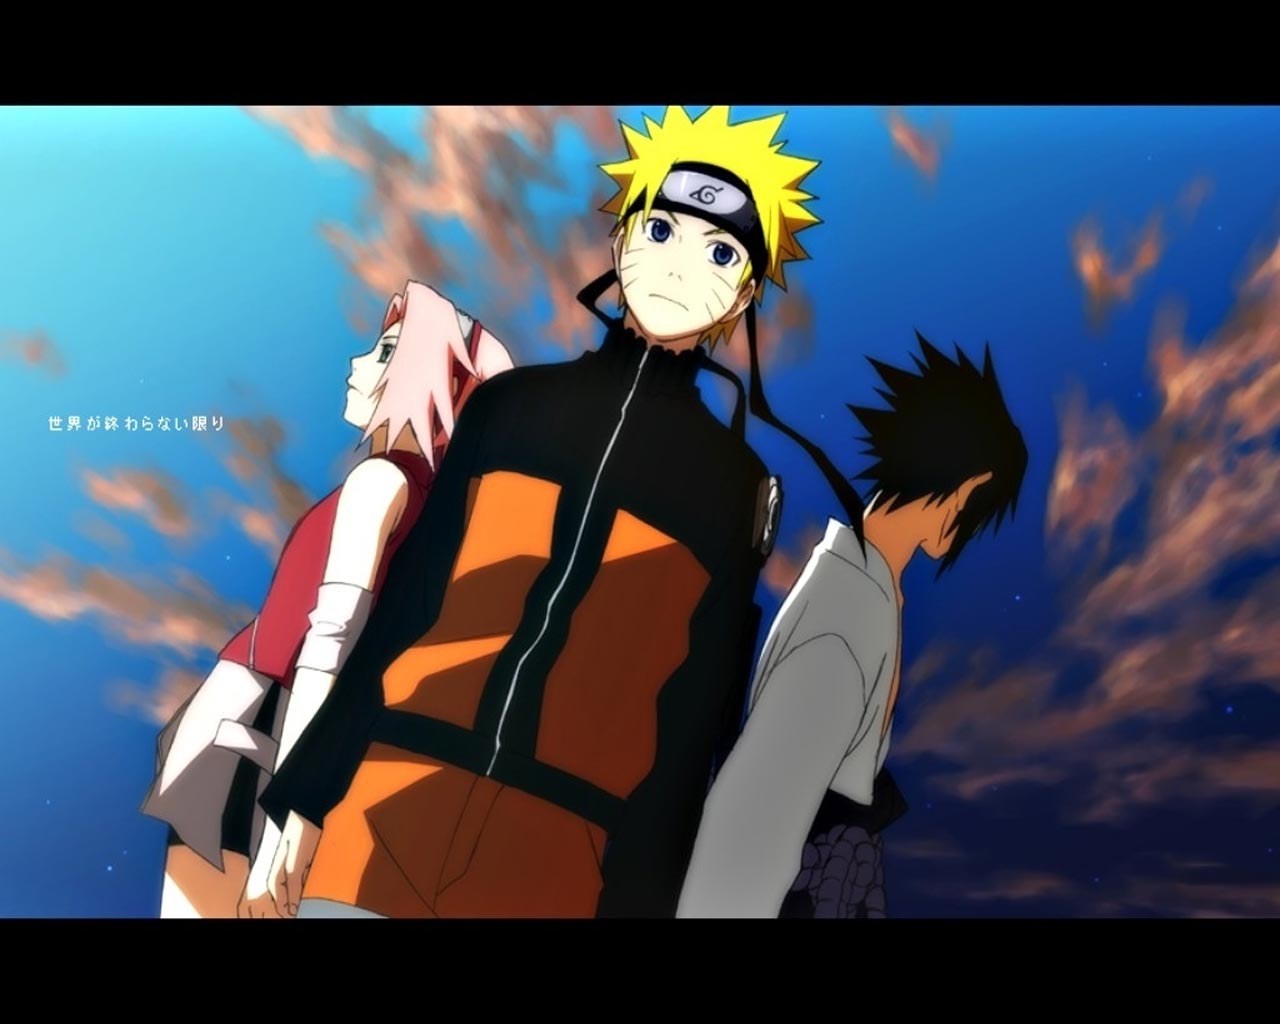 The Best Wallpaper Of Naruto Shippuden Top